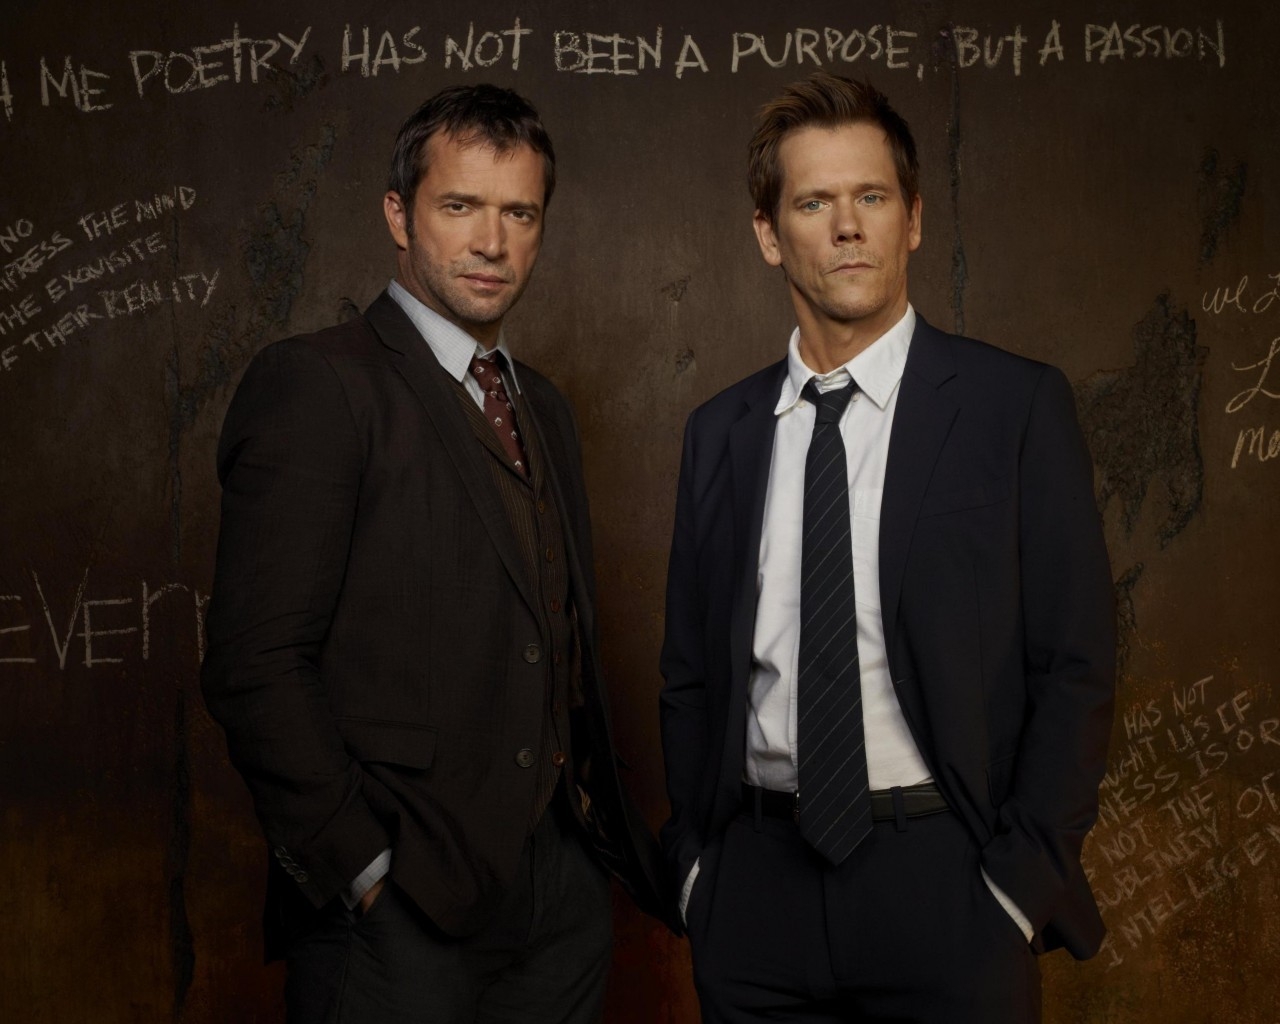 Kevin Bacon and James Purefoy for 1280 x 1024 resolution